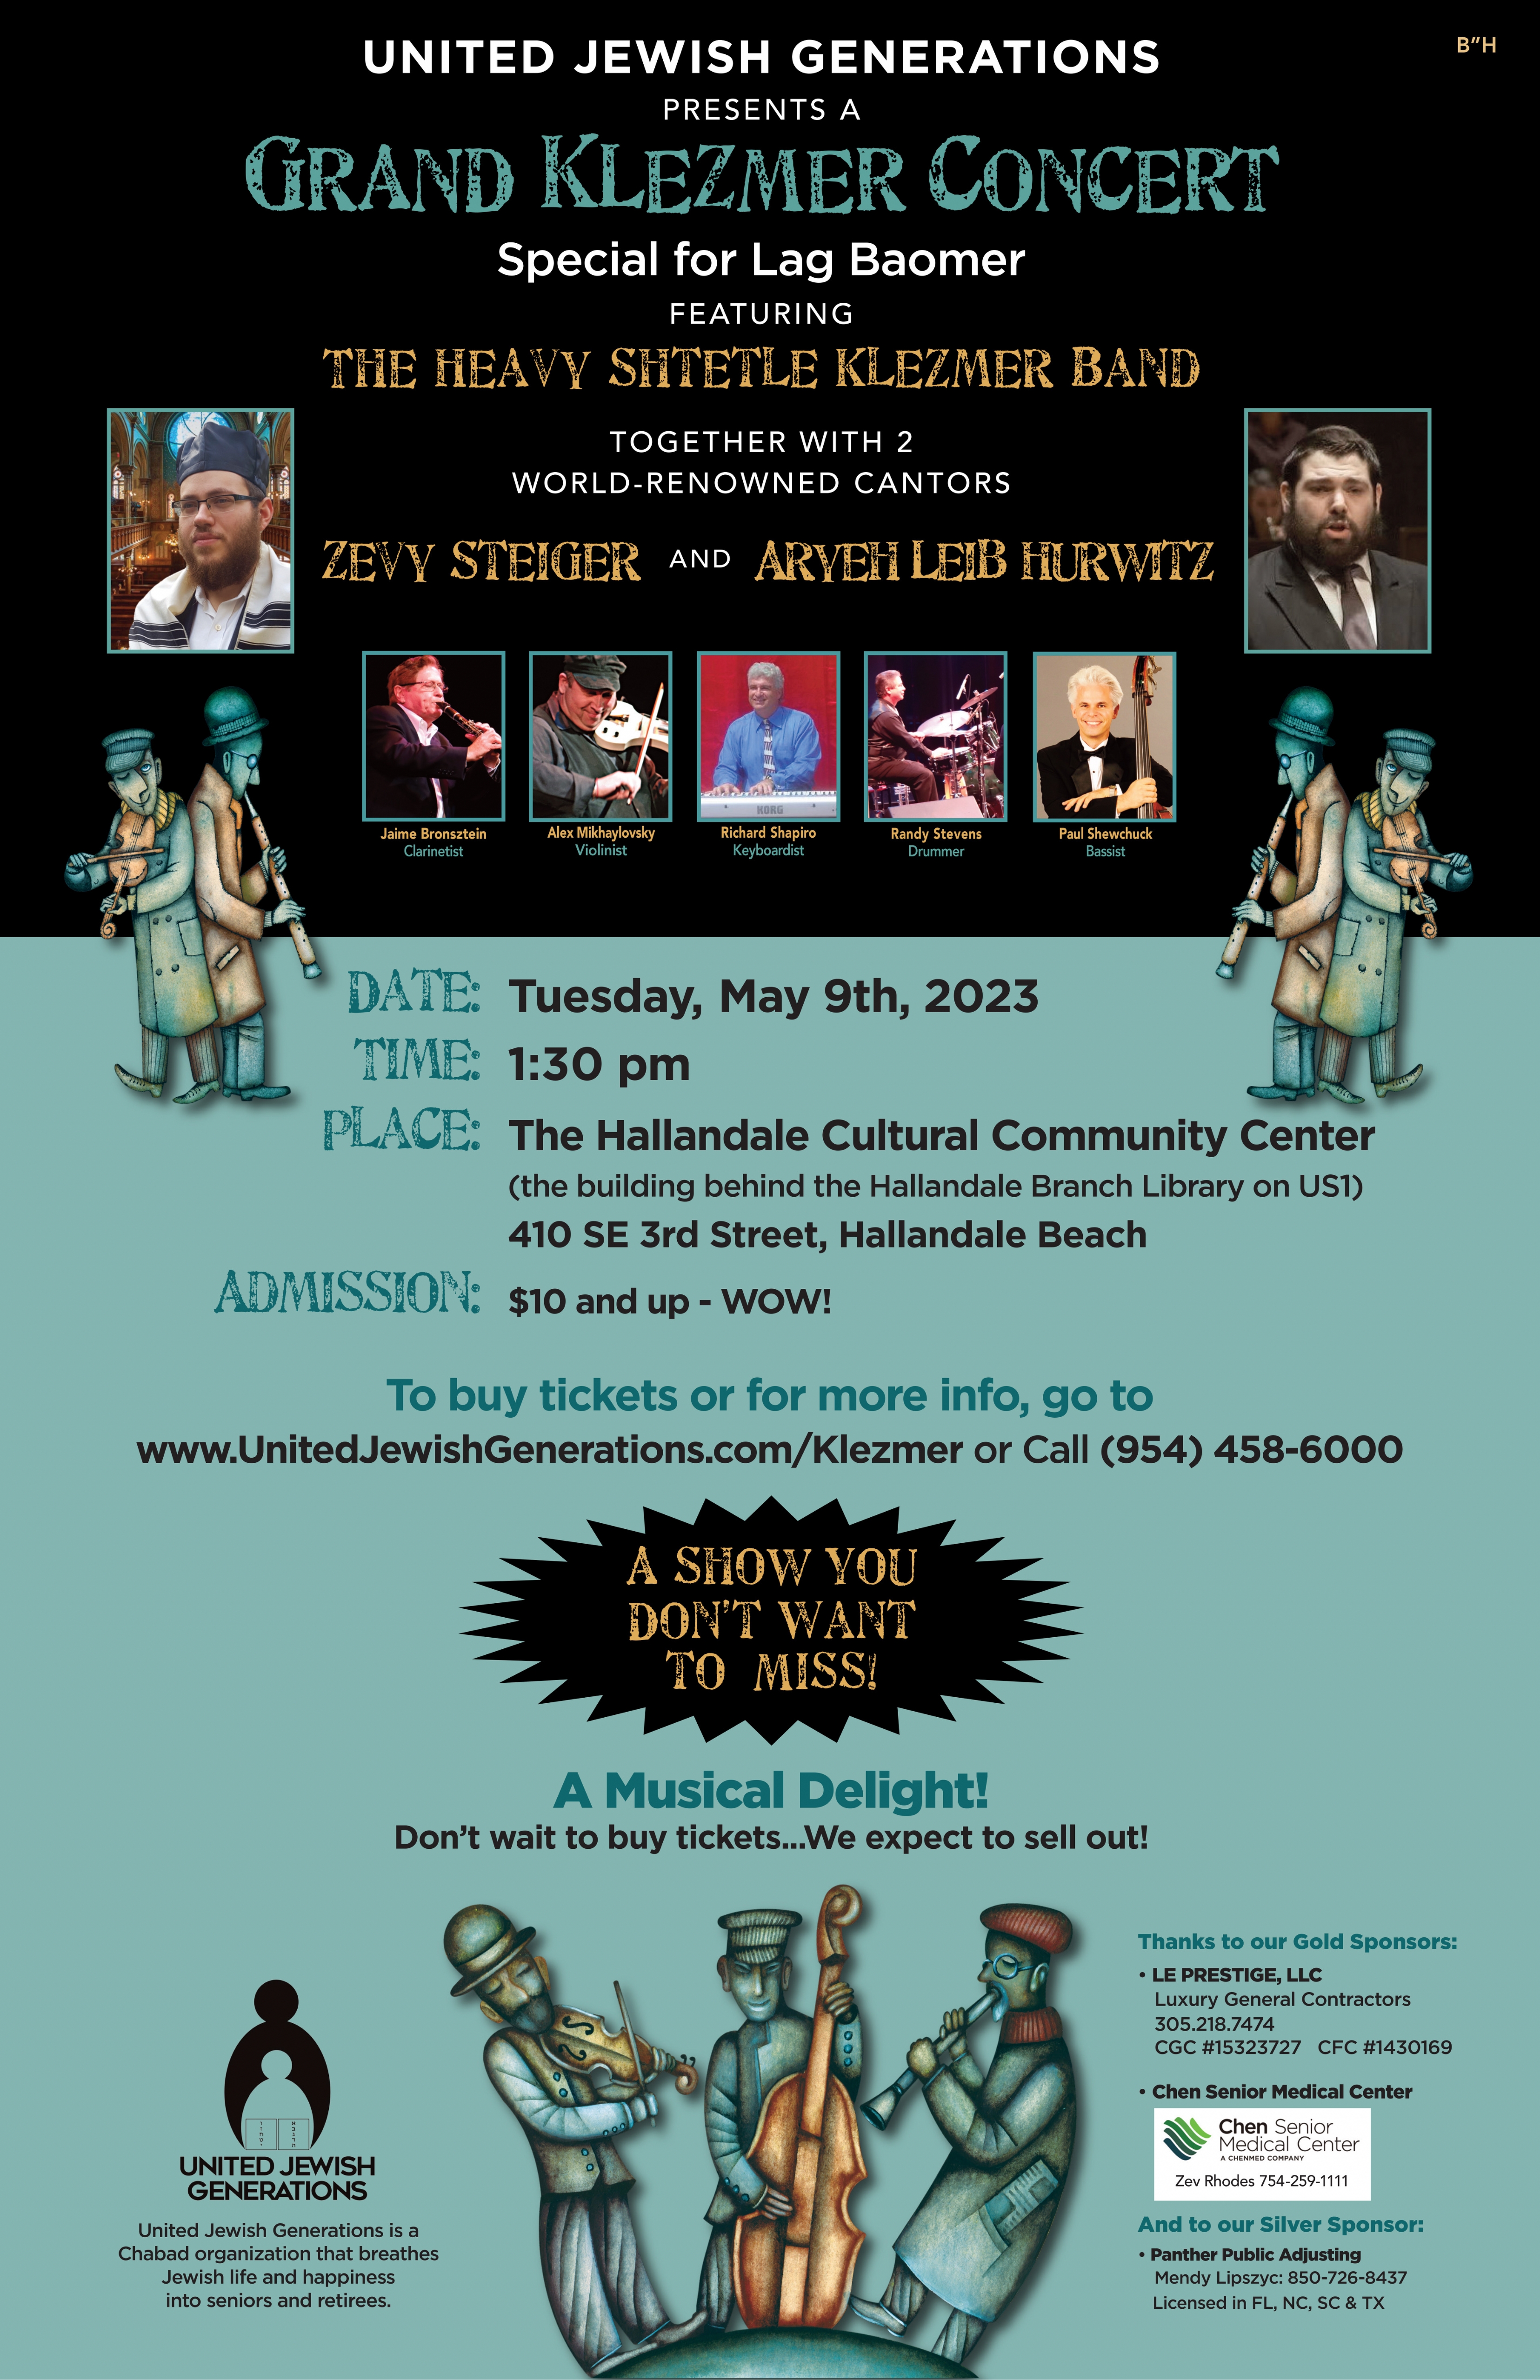 The Grand Klezmer Concert is one of the most exciting events in South Florida for those that enjoy beautiful music. Please join us on Tuesday, May 9th at 1:30 pm at the Hallandale Cultural Community Center for this great show! Tickets are only $10 and up and can be purchased by clicking below.